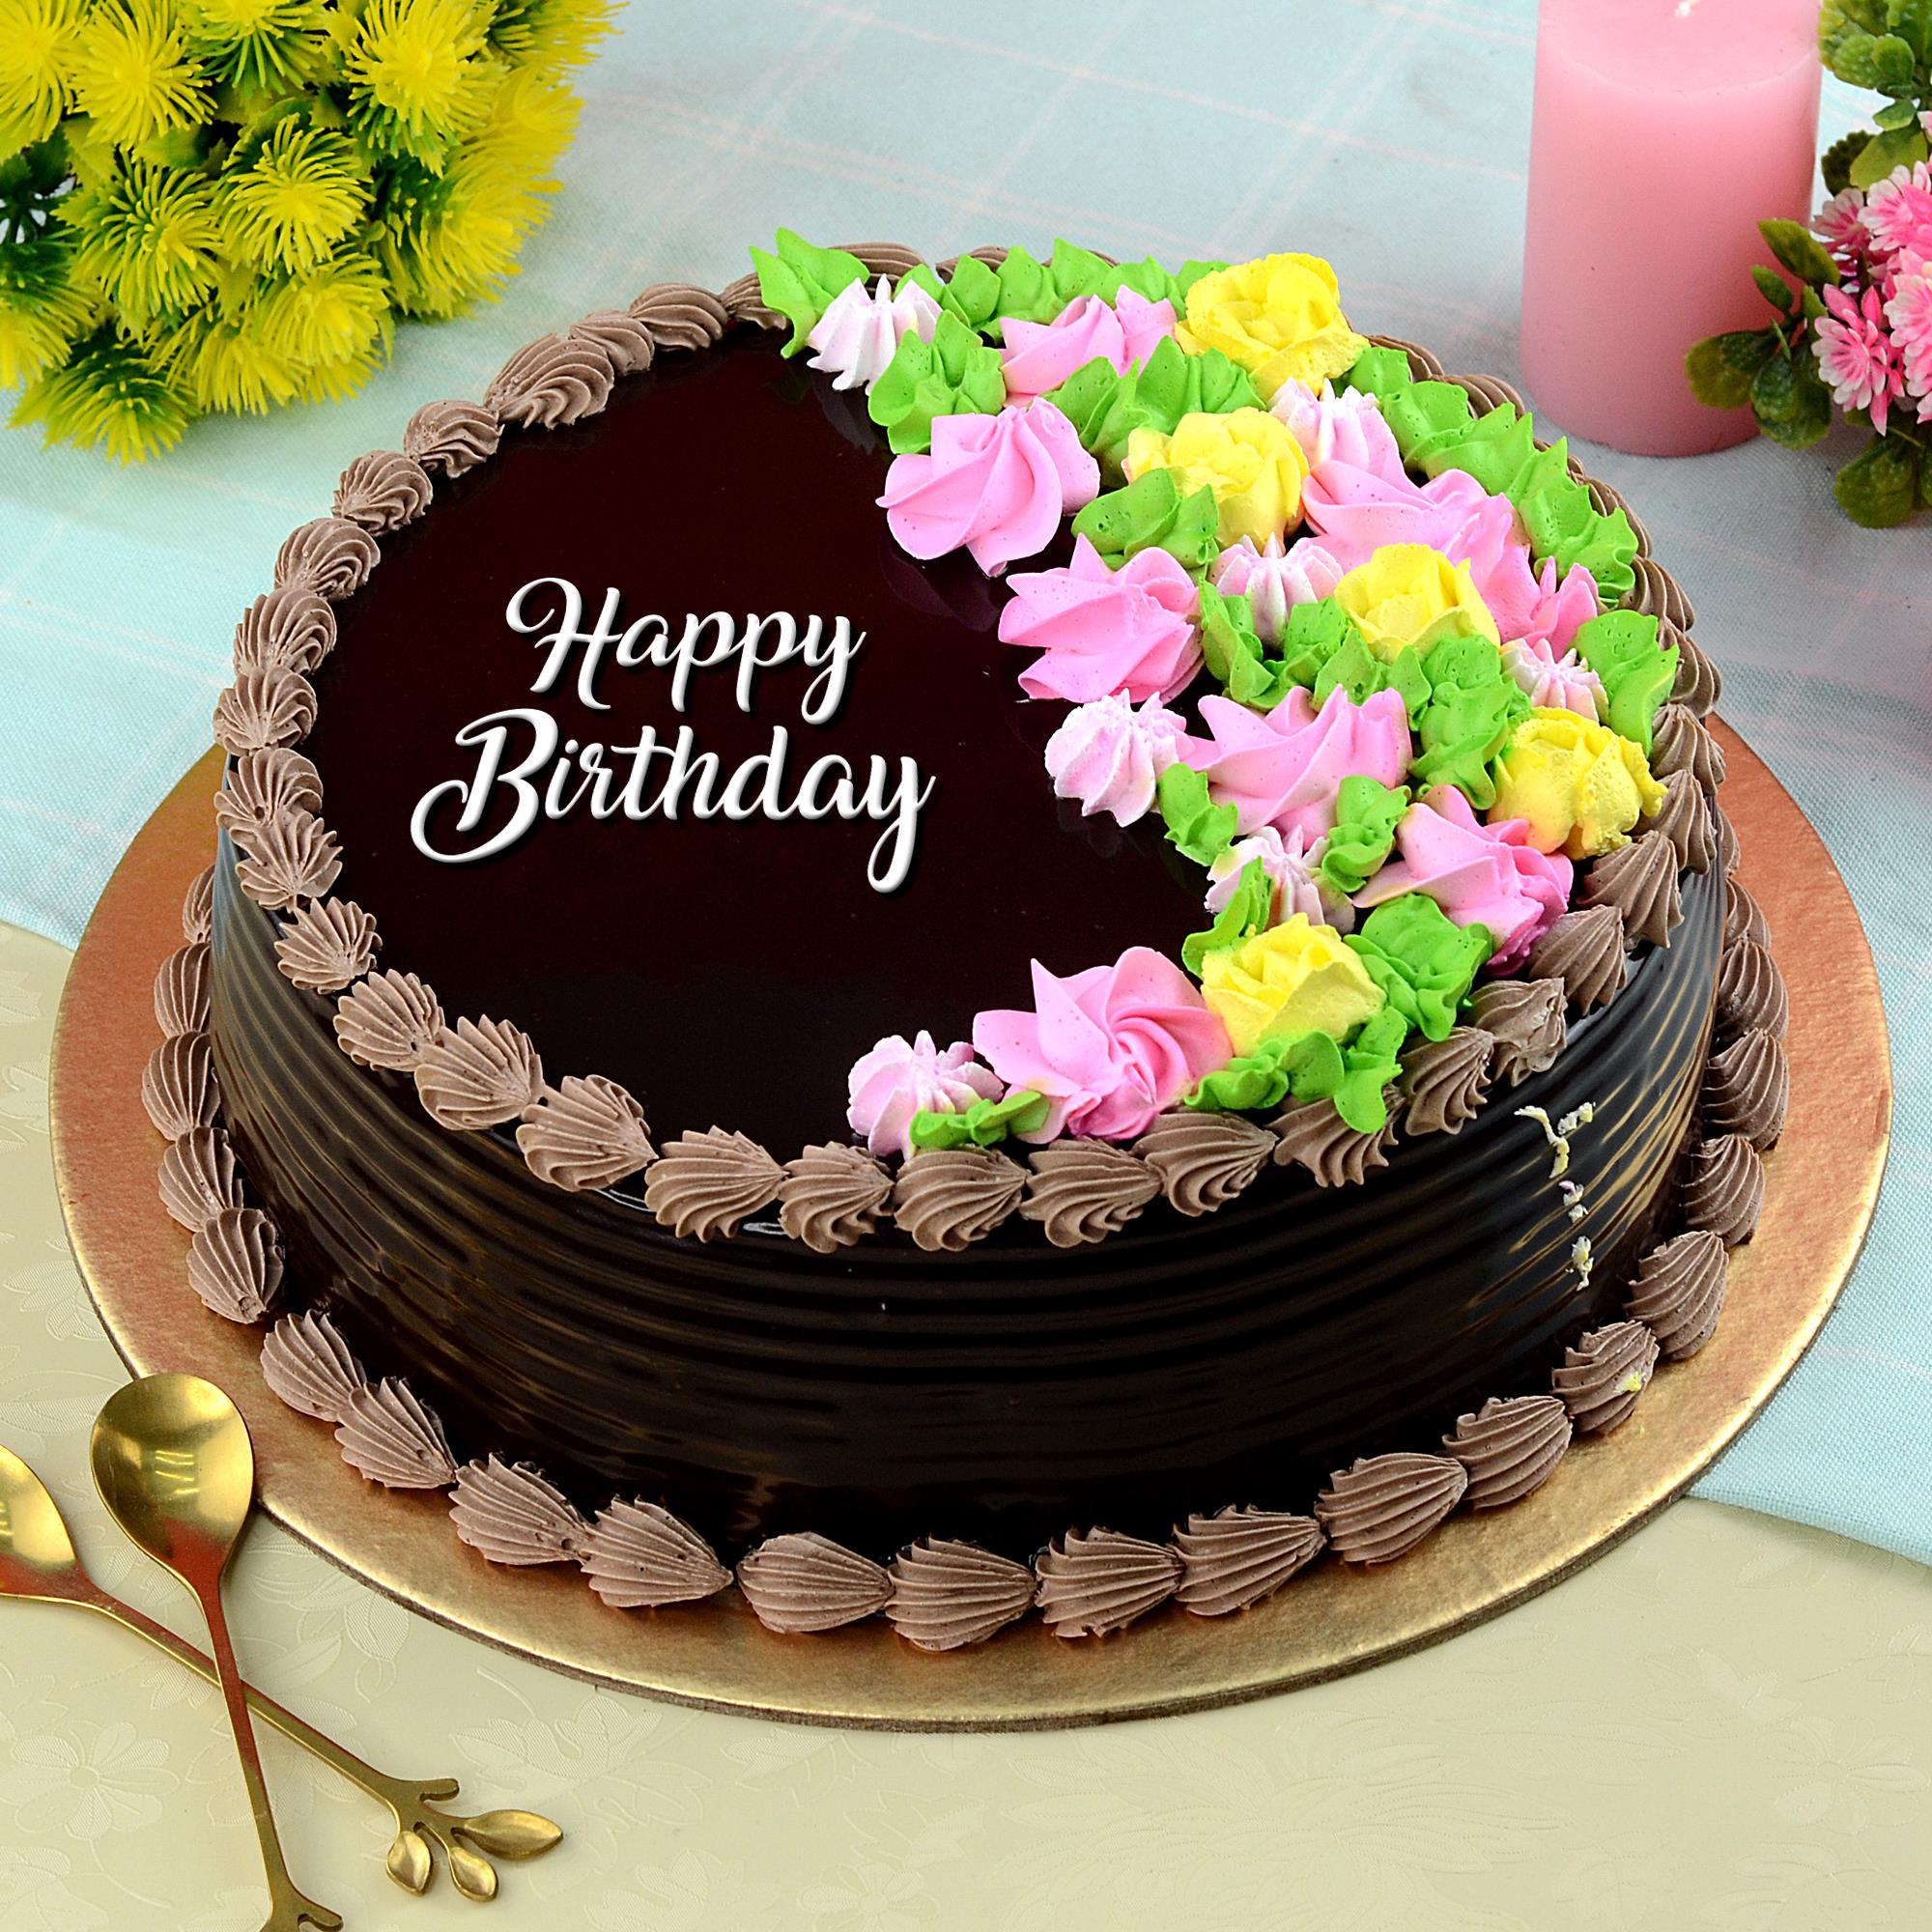  Happy Birthday Cake Images in HD Download free  Images SRkh